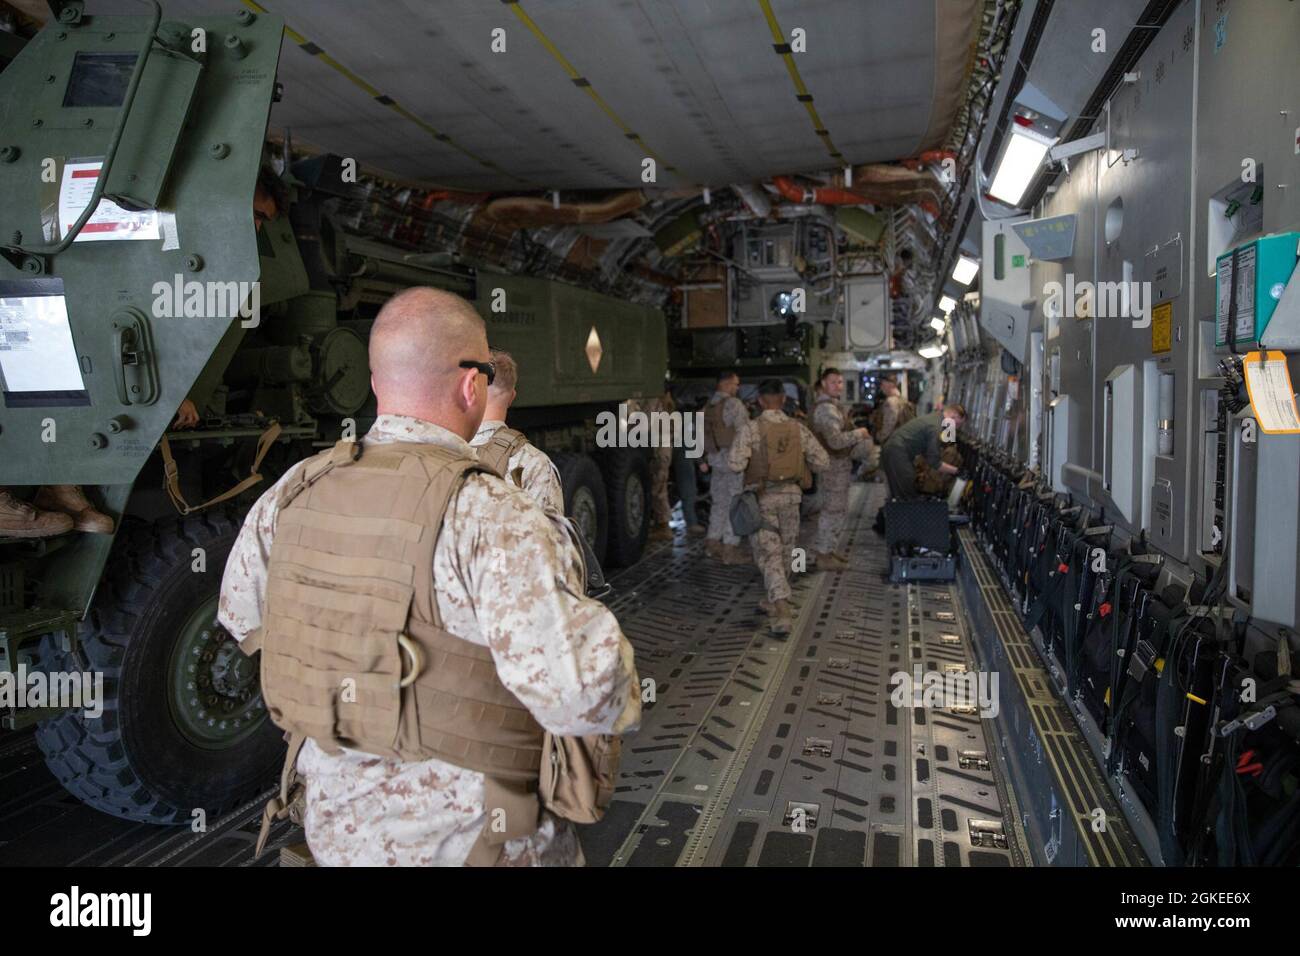 U.S. Marines with Battery Q, 5th Battalion, 11th Marines, 1st Marine Division, load onto a C-17 Globemaster III with 6th Airlift Squadron at Marine Corps Air Station Miramar, California, Mar. 30, 2021. The Marines were transported to Marine Corps Air Ground Combat Center Twentynine Palms to conduct a missile range training exercise to maintain military occupational specialty proficiency. Stock Photo